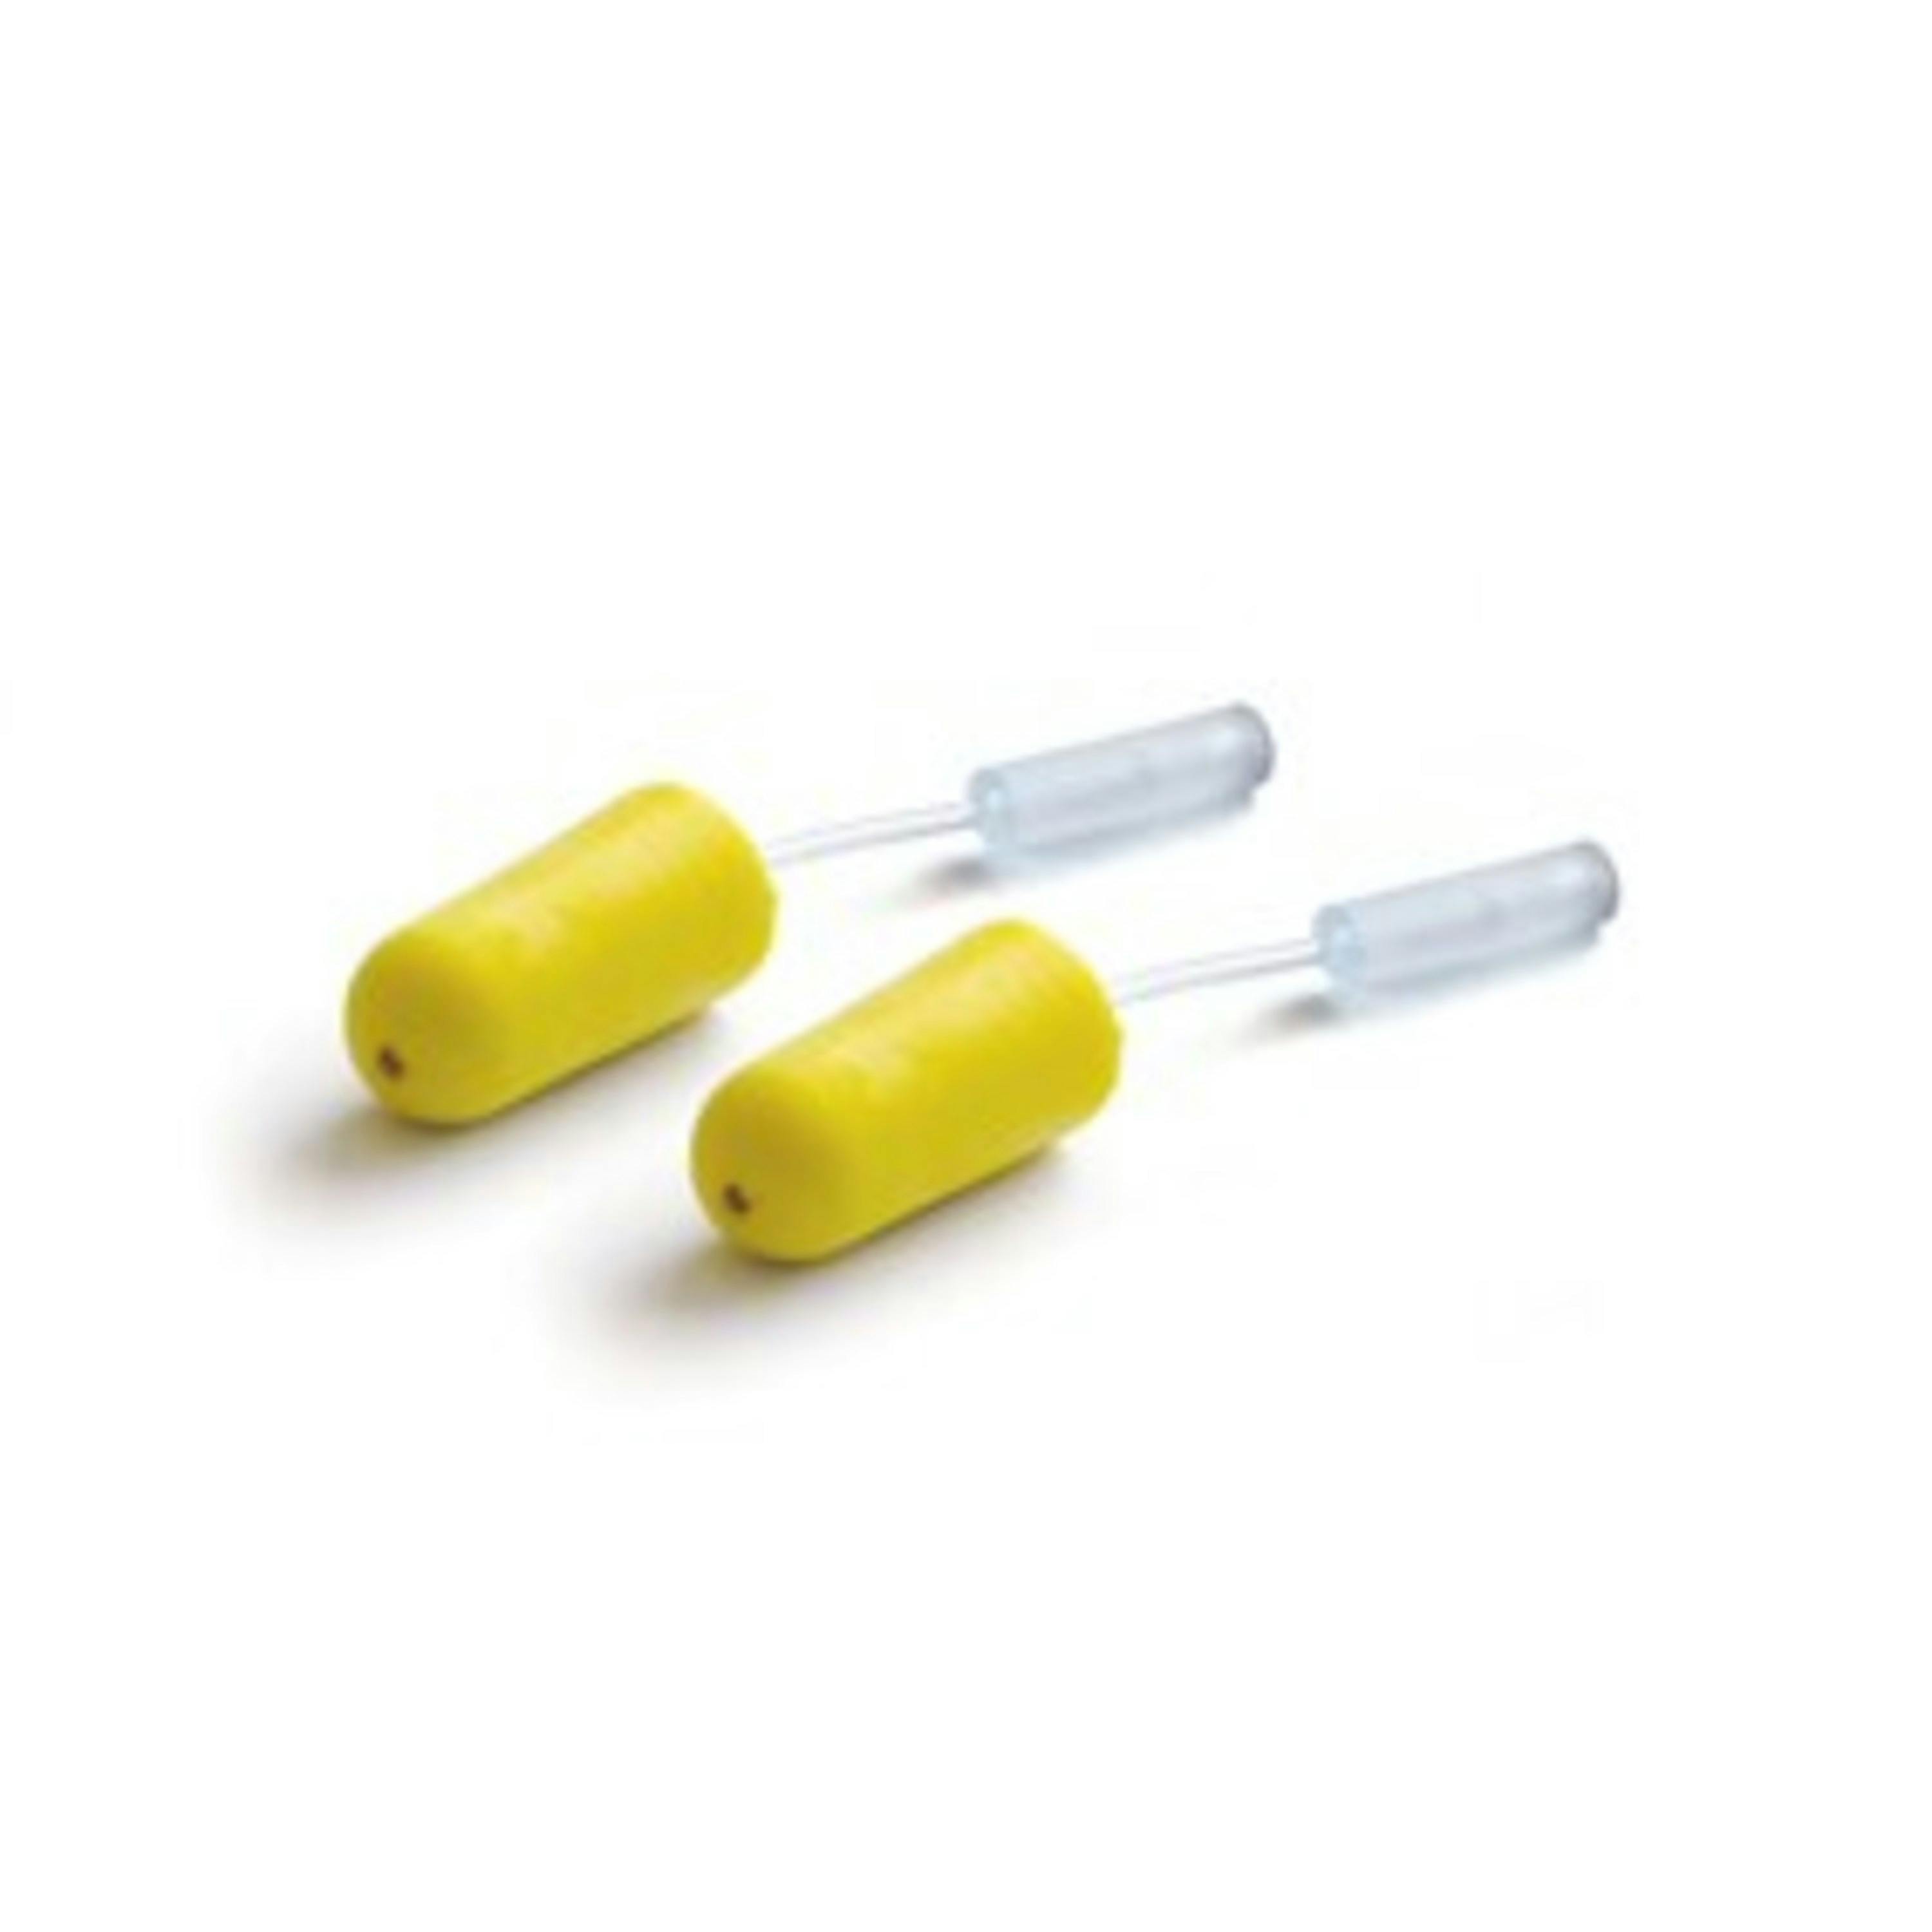 3M™ E-A-Rfit™ TaperFit™ 2 Probed Test Plugs 393-2006-50